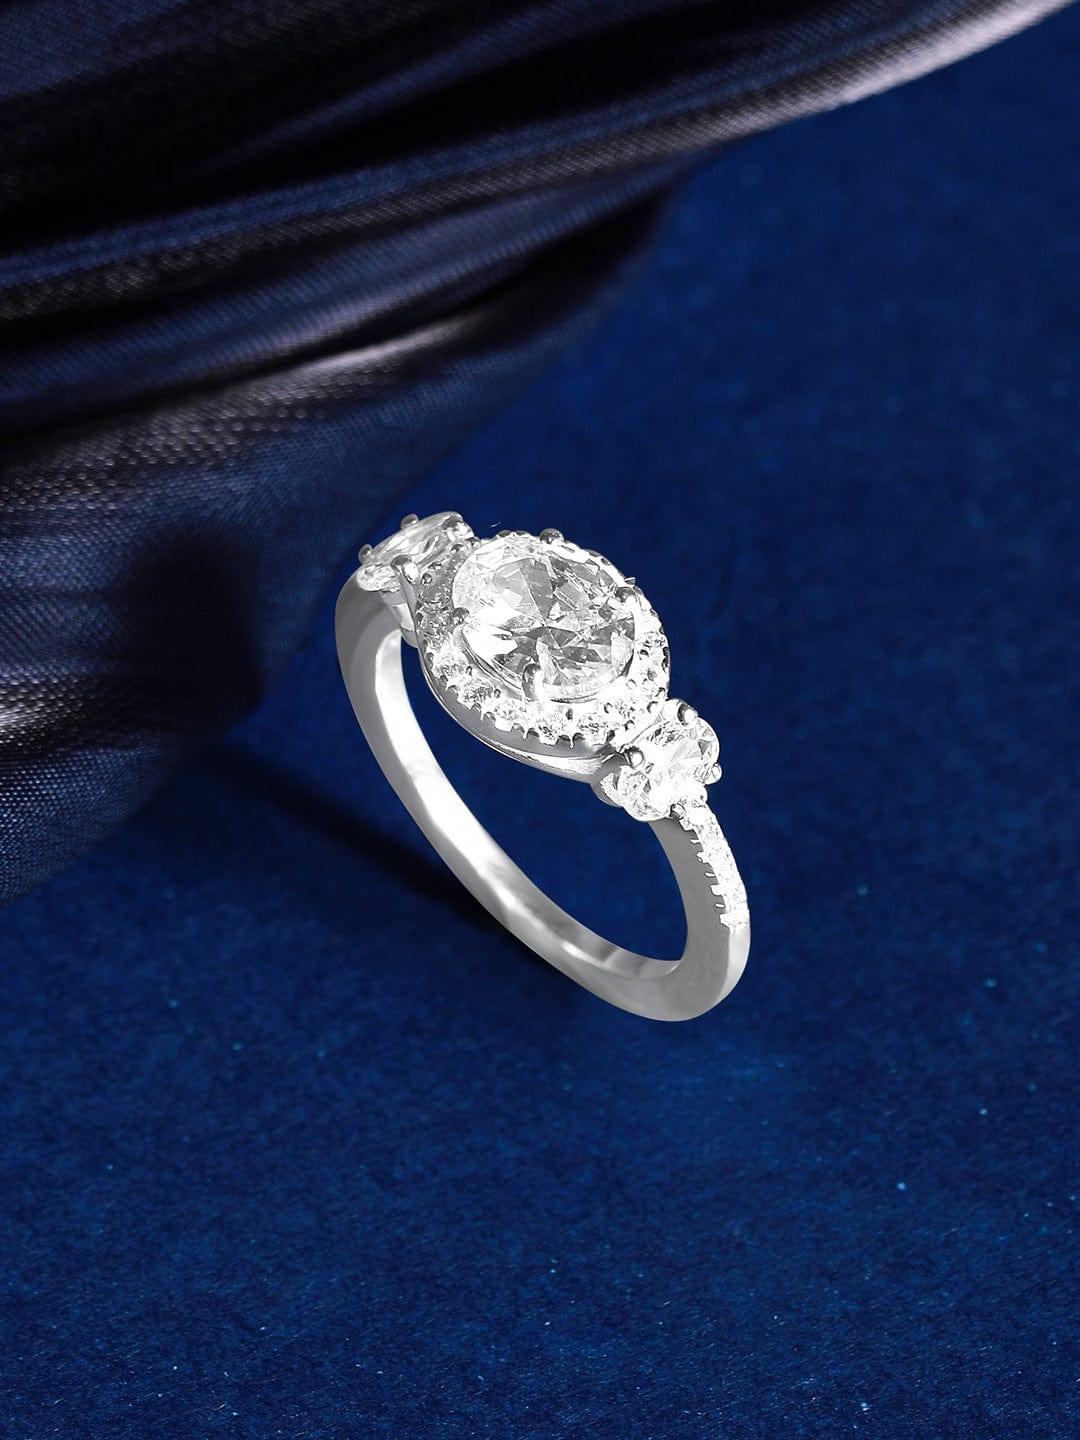 The Sparkling Zirconia Ring - Indiakreations